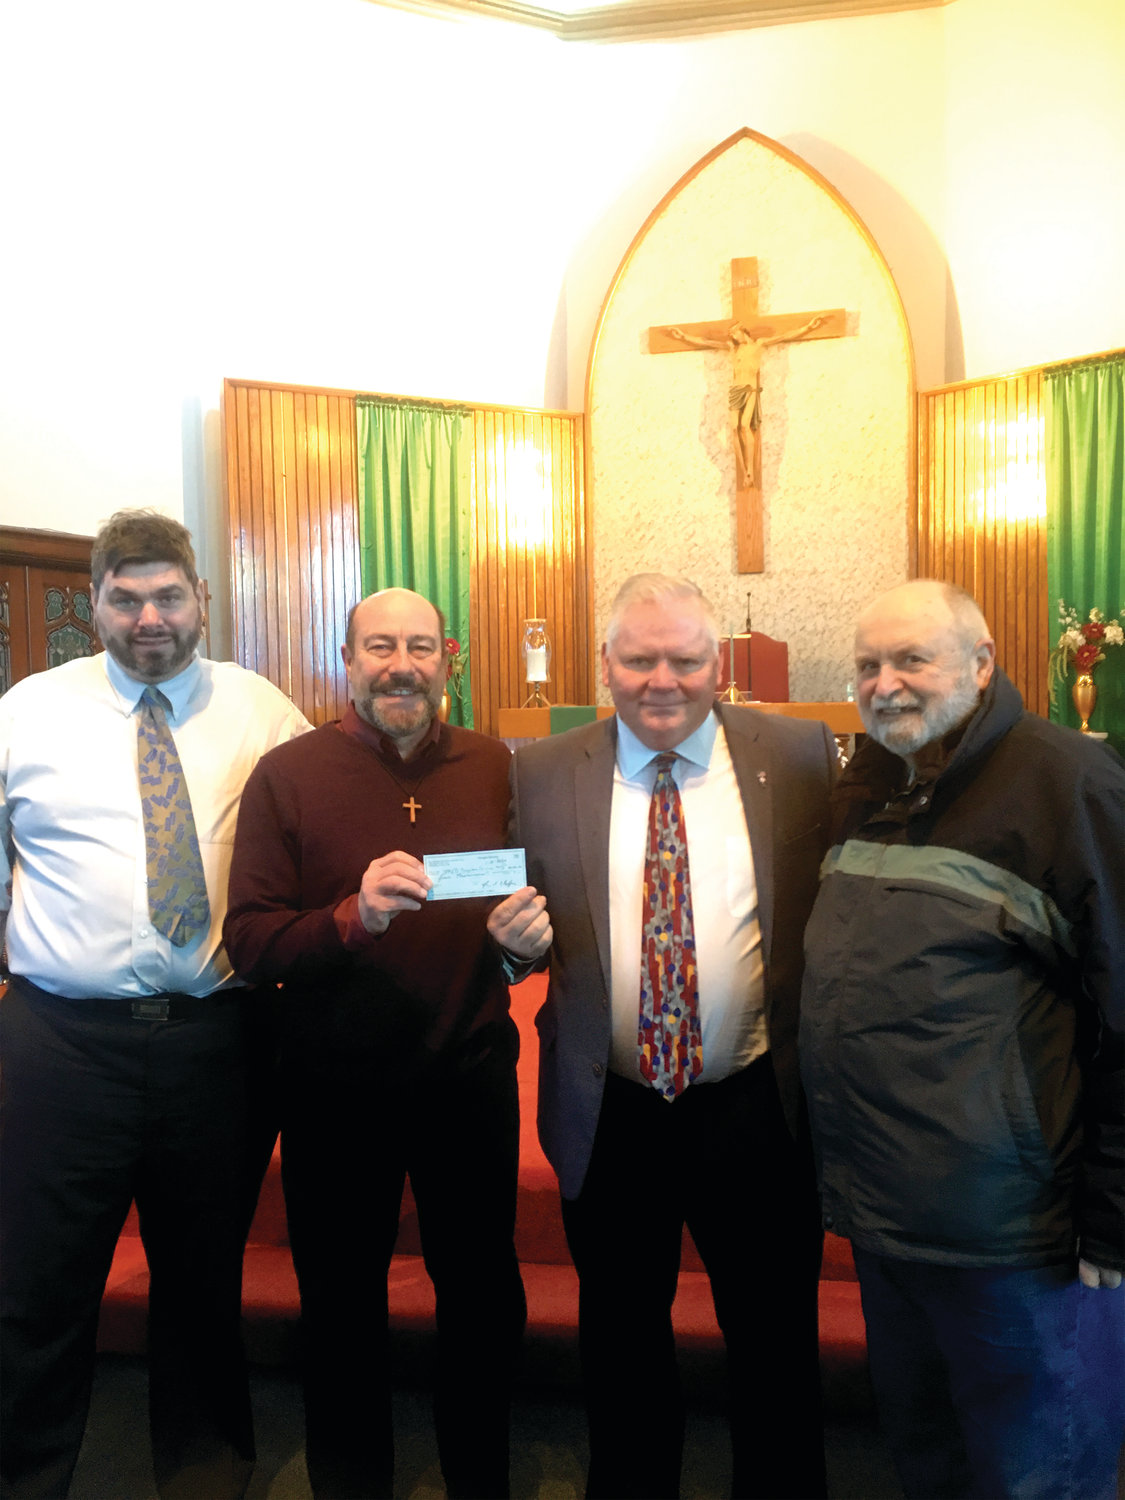 Lincoln Grand Knight, Ray Hedenskog, presents a check for $4000 to Matthew Perry, chairman of Special Religious Educational Development (SPRED), as part of the annual Knights of Columbus Tootsie Roll drive. The money will be used to support people with special needs in local parishes. From left, Peter Hamm, Matthew Perry, Raymond Hedenskog and Bud Gardner.